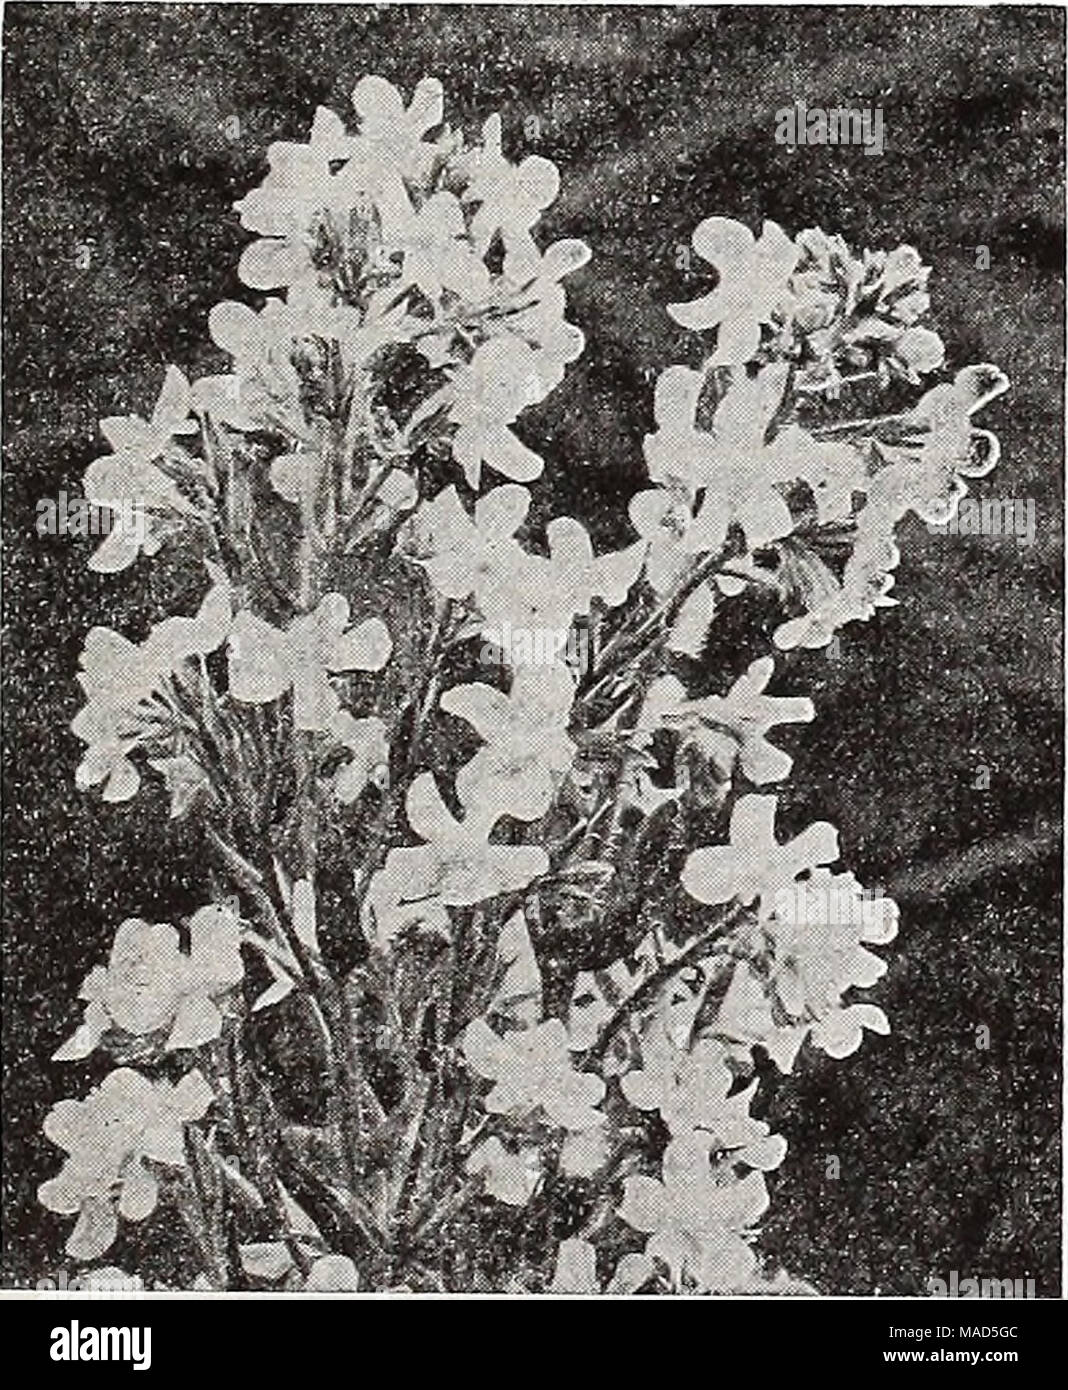 . Dreer's wholesale catalog for florists : autumn 1938 edition . Anchusa Itallca, Dropmore Variety Anchusa—Alkanet, Bugloss Itallca, Dropmore Variety. Grows 3 to 6 feet high. Bears during May and June In abundance flowers of the richest Gentian blue. Trade pkt. 15c; oz. 50c. Itallca Xilssadell, An Improved form of the Dropmore variety. Of strong, vigorous growth, about 5 feet high. Showy sprays of extra large, clear Gentian blue flowers. Trade pkt. 15c; oz. 60c; % lb. $2.00. Anchusa myosotidiflora A distinct dwarf species, 10 Inches high, pro- ducing during April and May sprays of Forget-Me- N Stock Photo